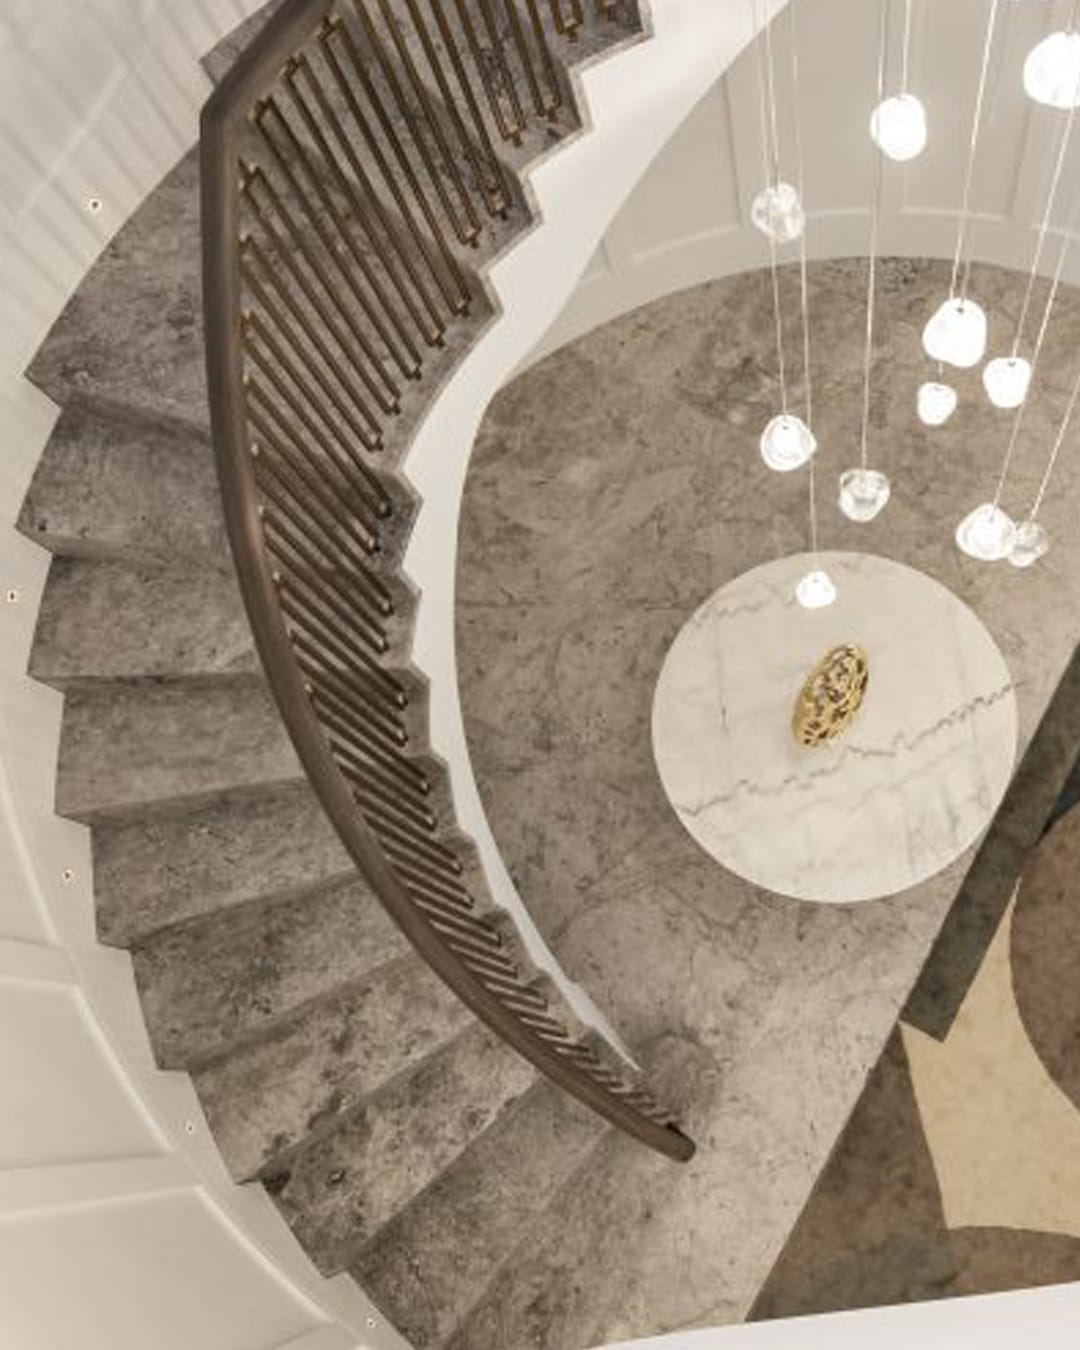 Vaucluse Project Felton Studio and Greg Natale Stairwell - RMS Marble